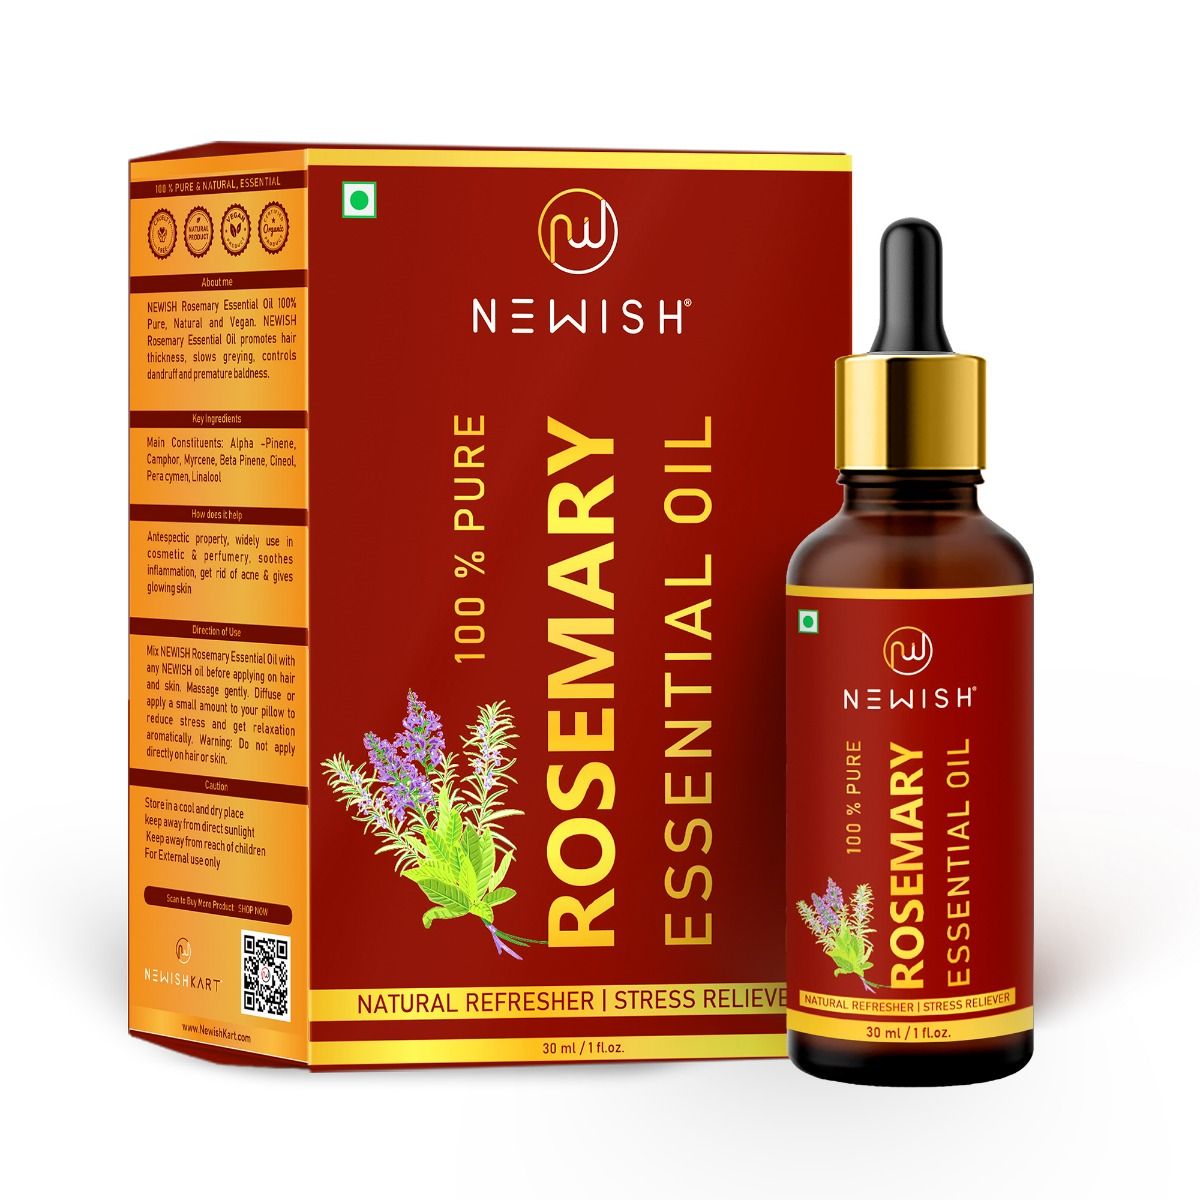 Buy Newish 100% Pure Rosemary Essential Oil, 30 ml Online